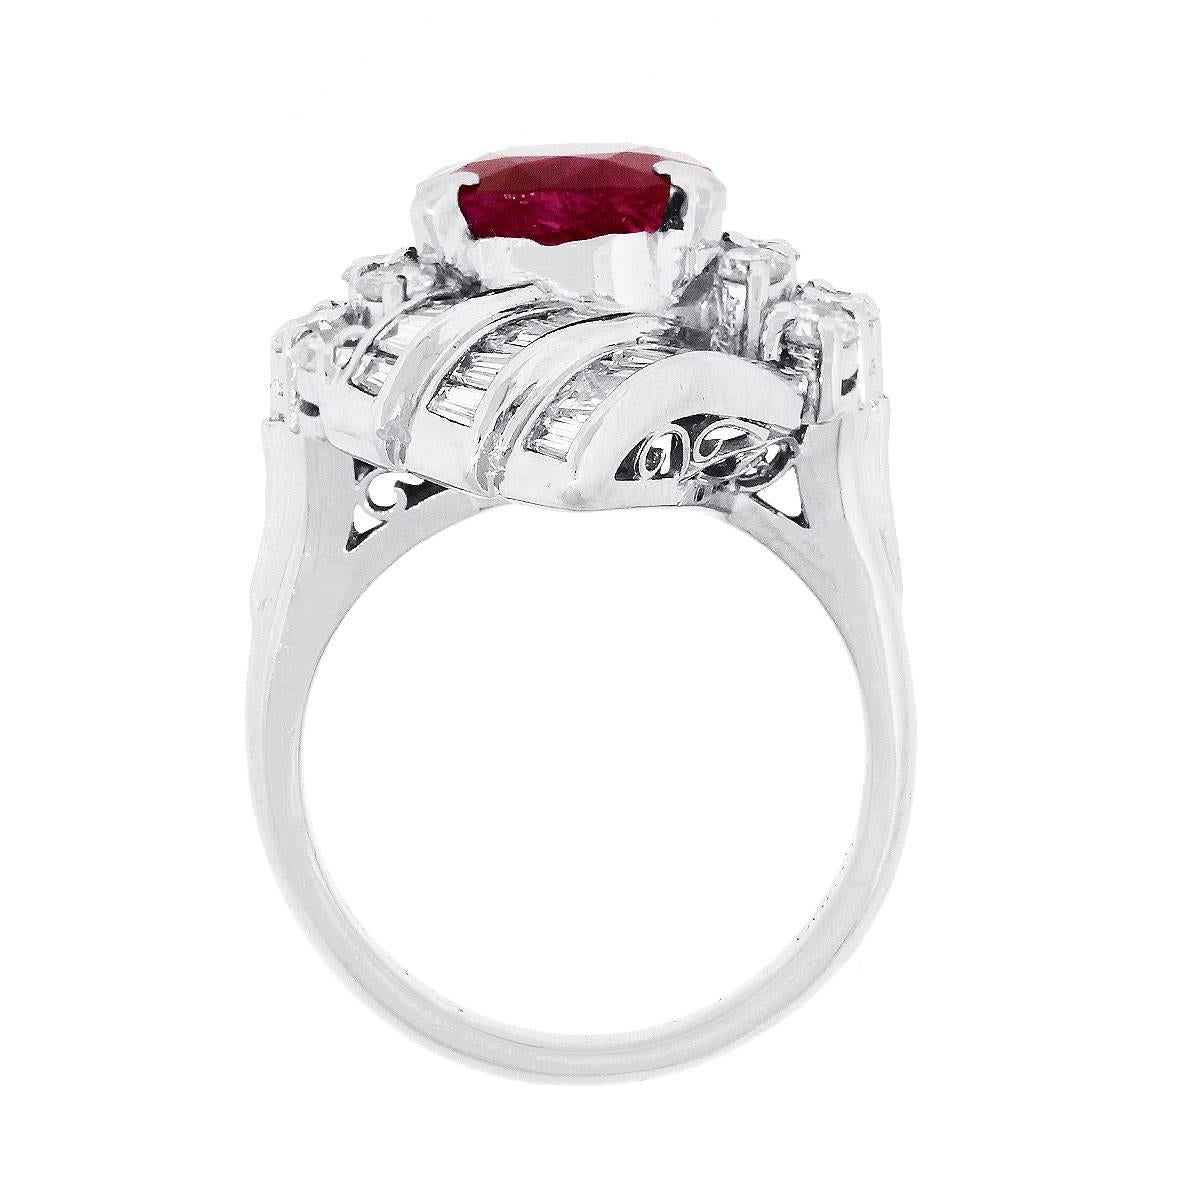 3.97 Carat Cushion Cut Ruby Diamond Cocktail Ring In Excellent Condition For Sale In Boca Raton, FL